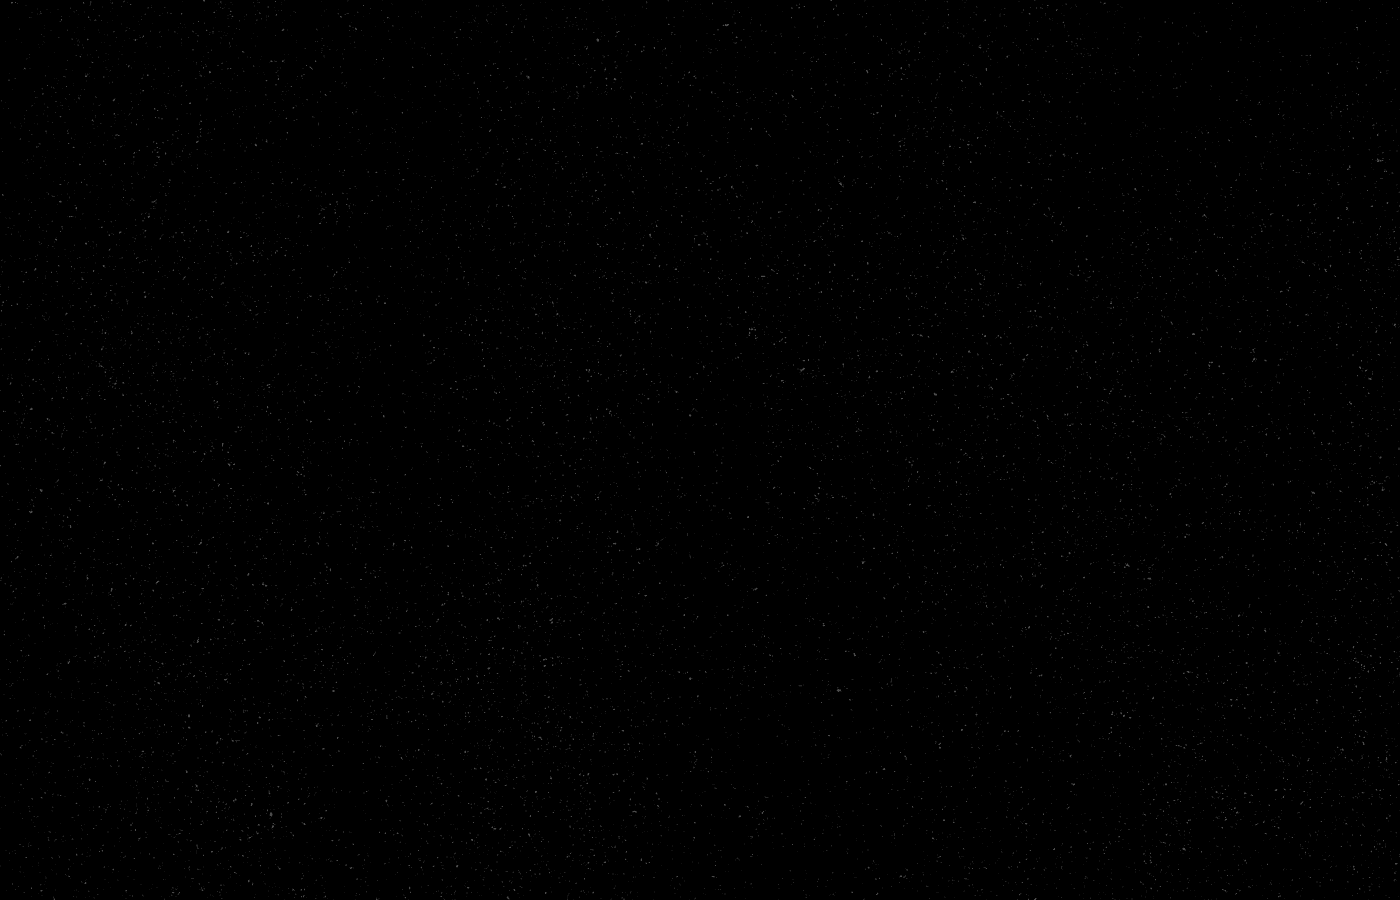 deep space image background